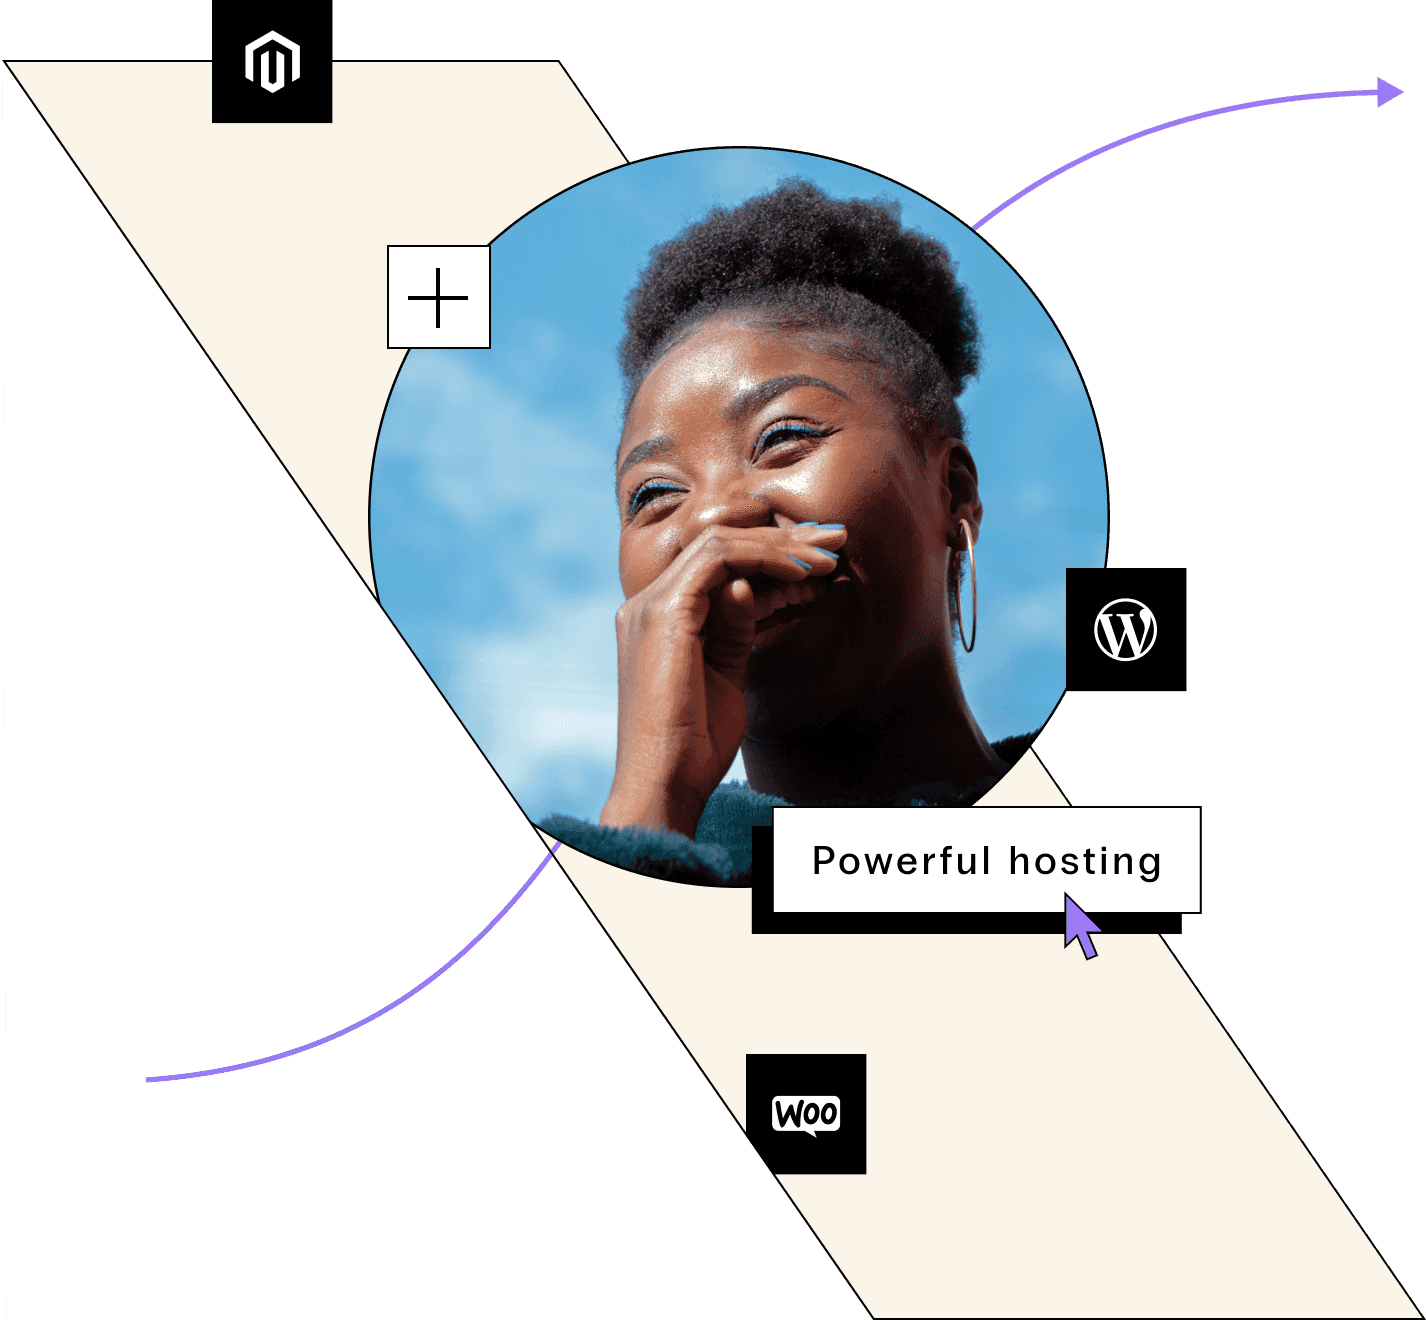 A woman with hoop earrings candidly laughs against a limitless sky, her managed hosting services options float in small squares, a prominent create button for WordPress, Magento, and WooCommerce